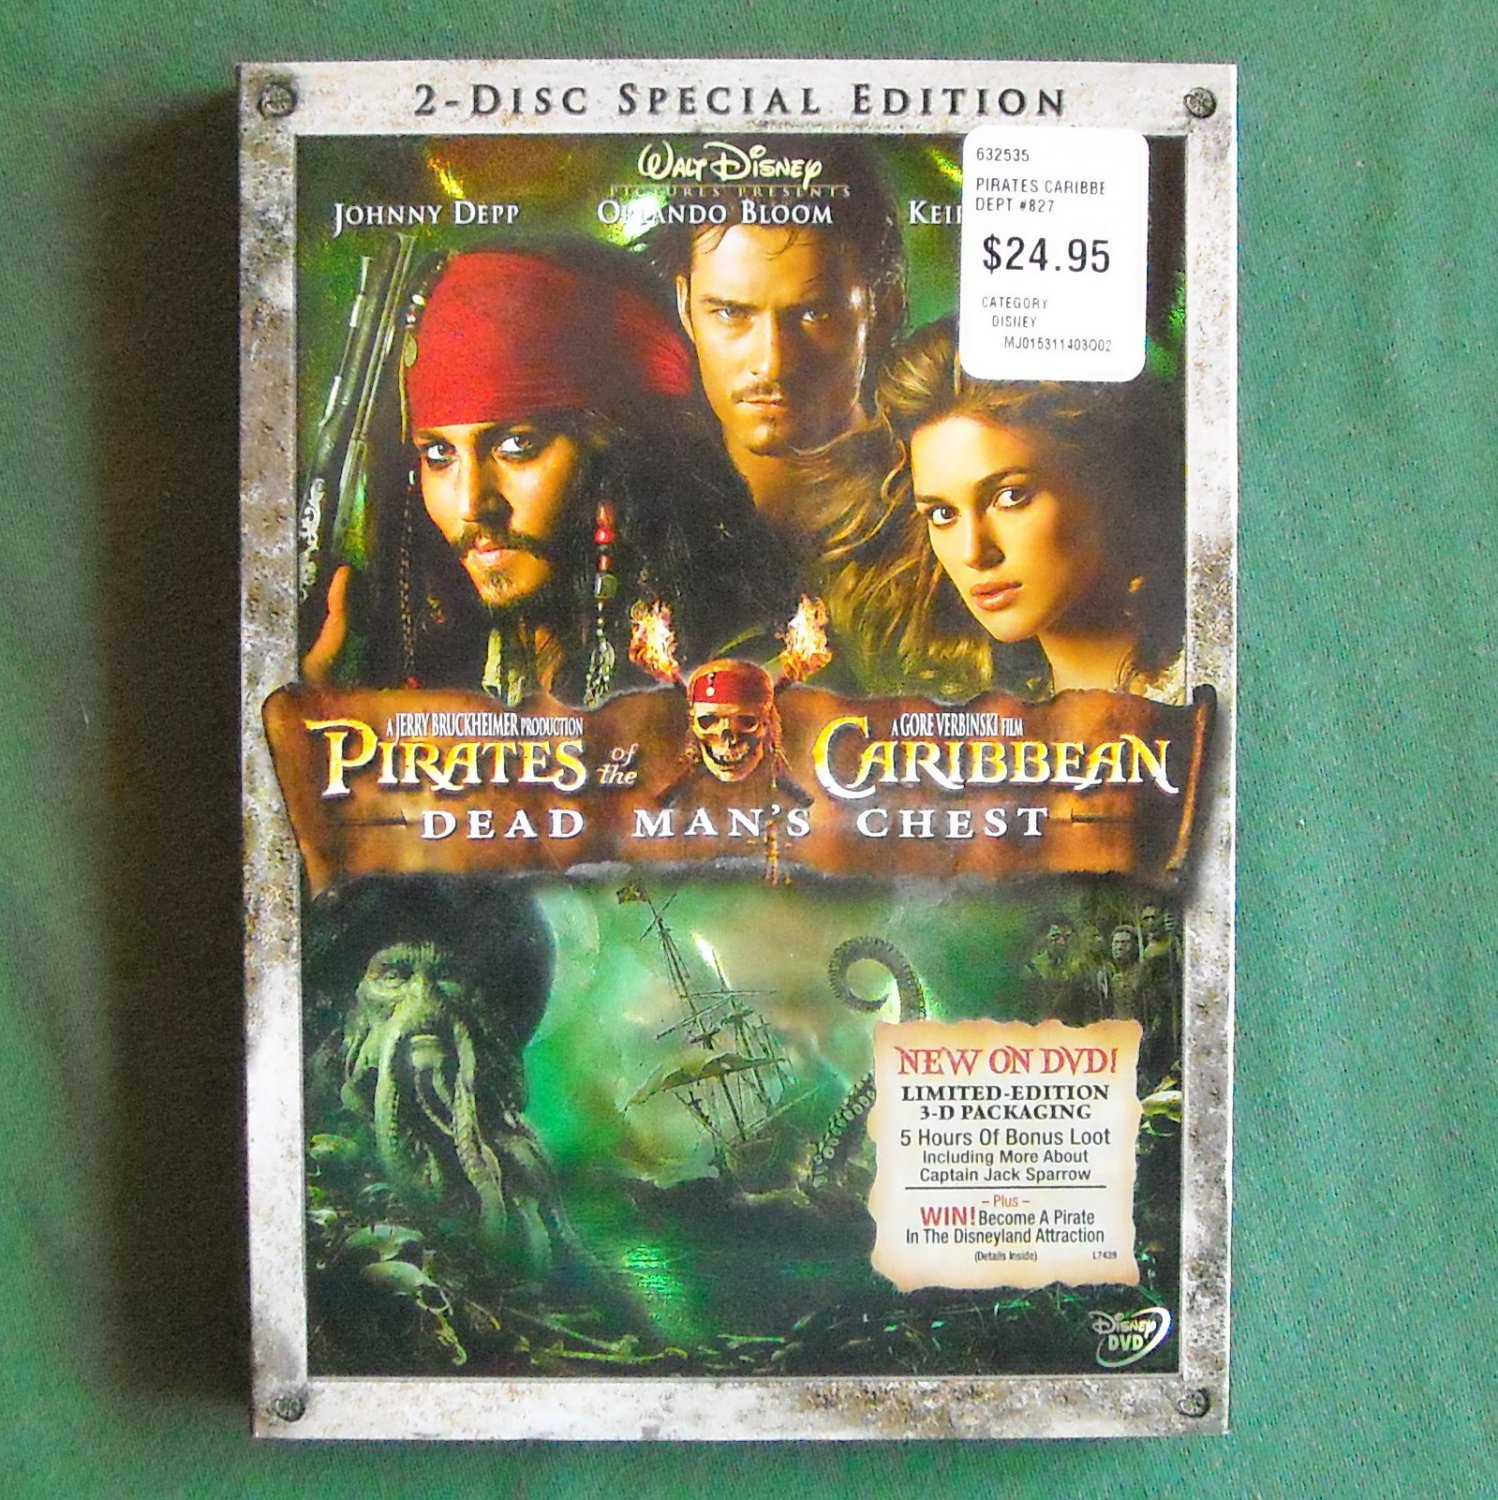 instal the last version for ipod Pirates of the Caribbean: Dead Man’s